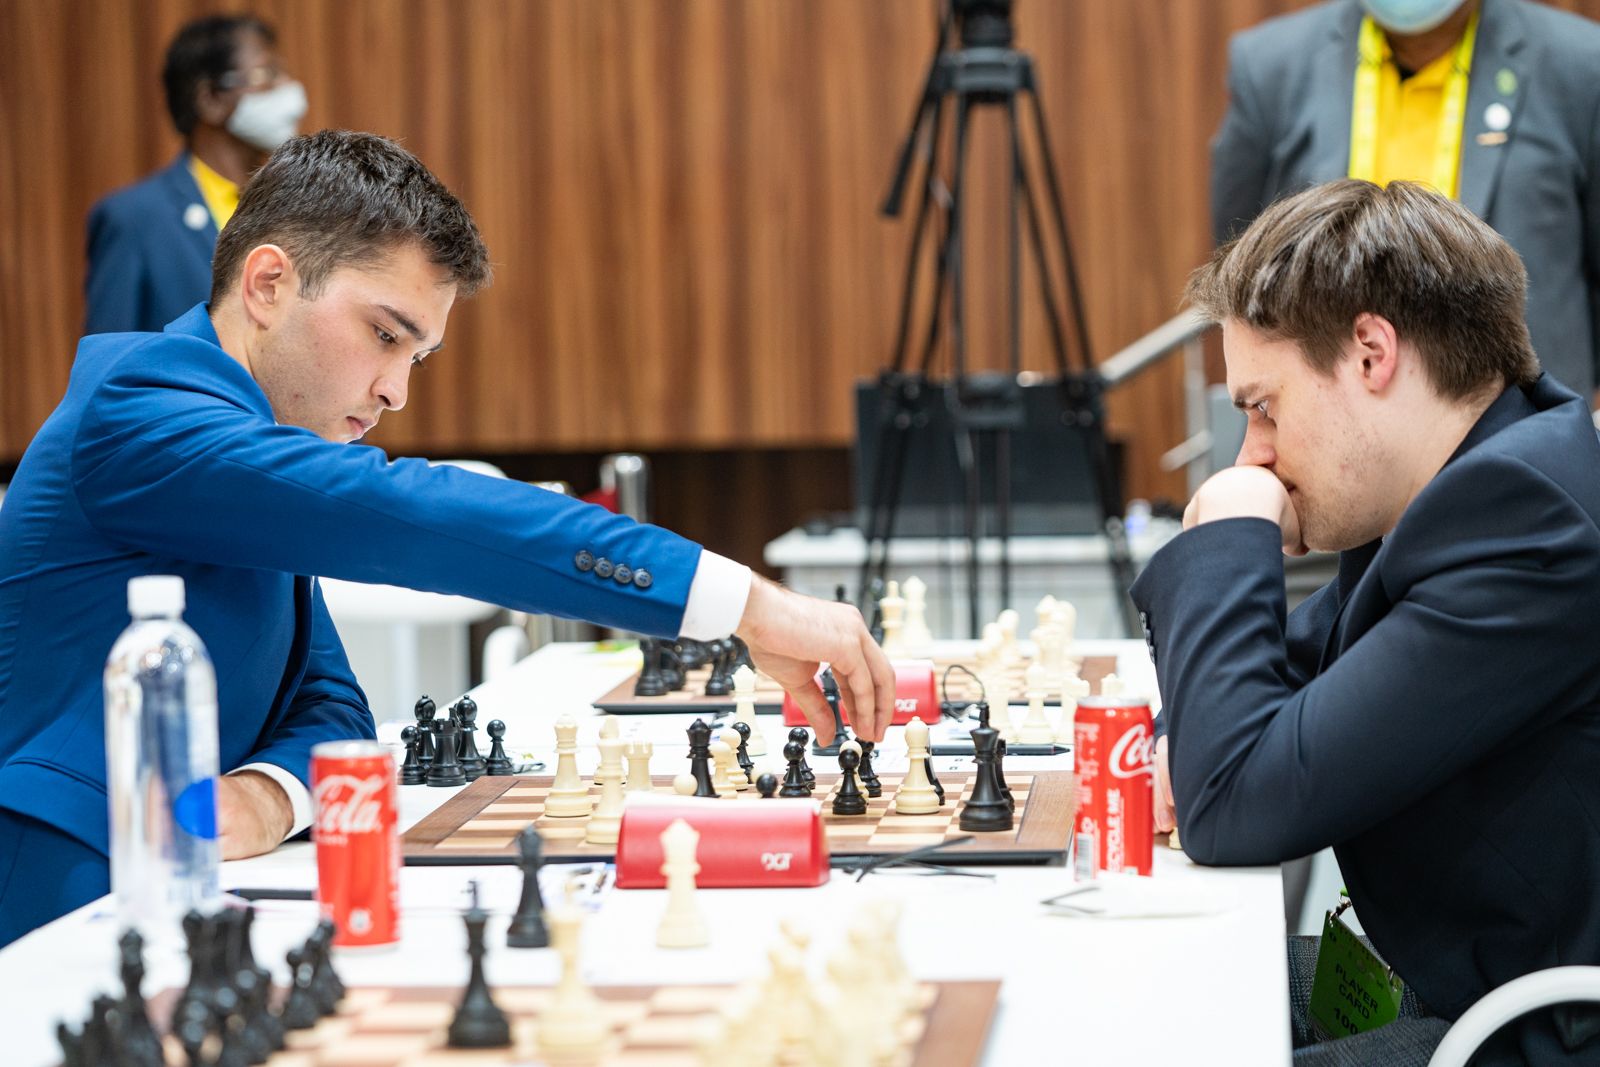 Event: 44th FIDE Chess Olympiad - Round 8 : r/chess